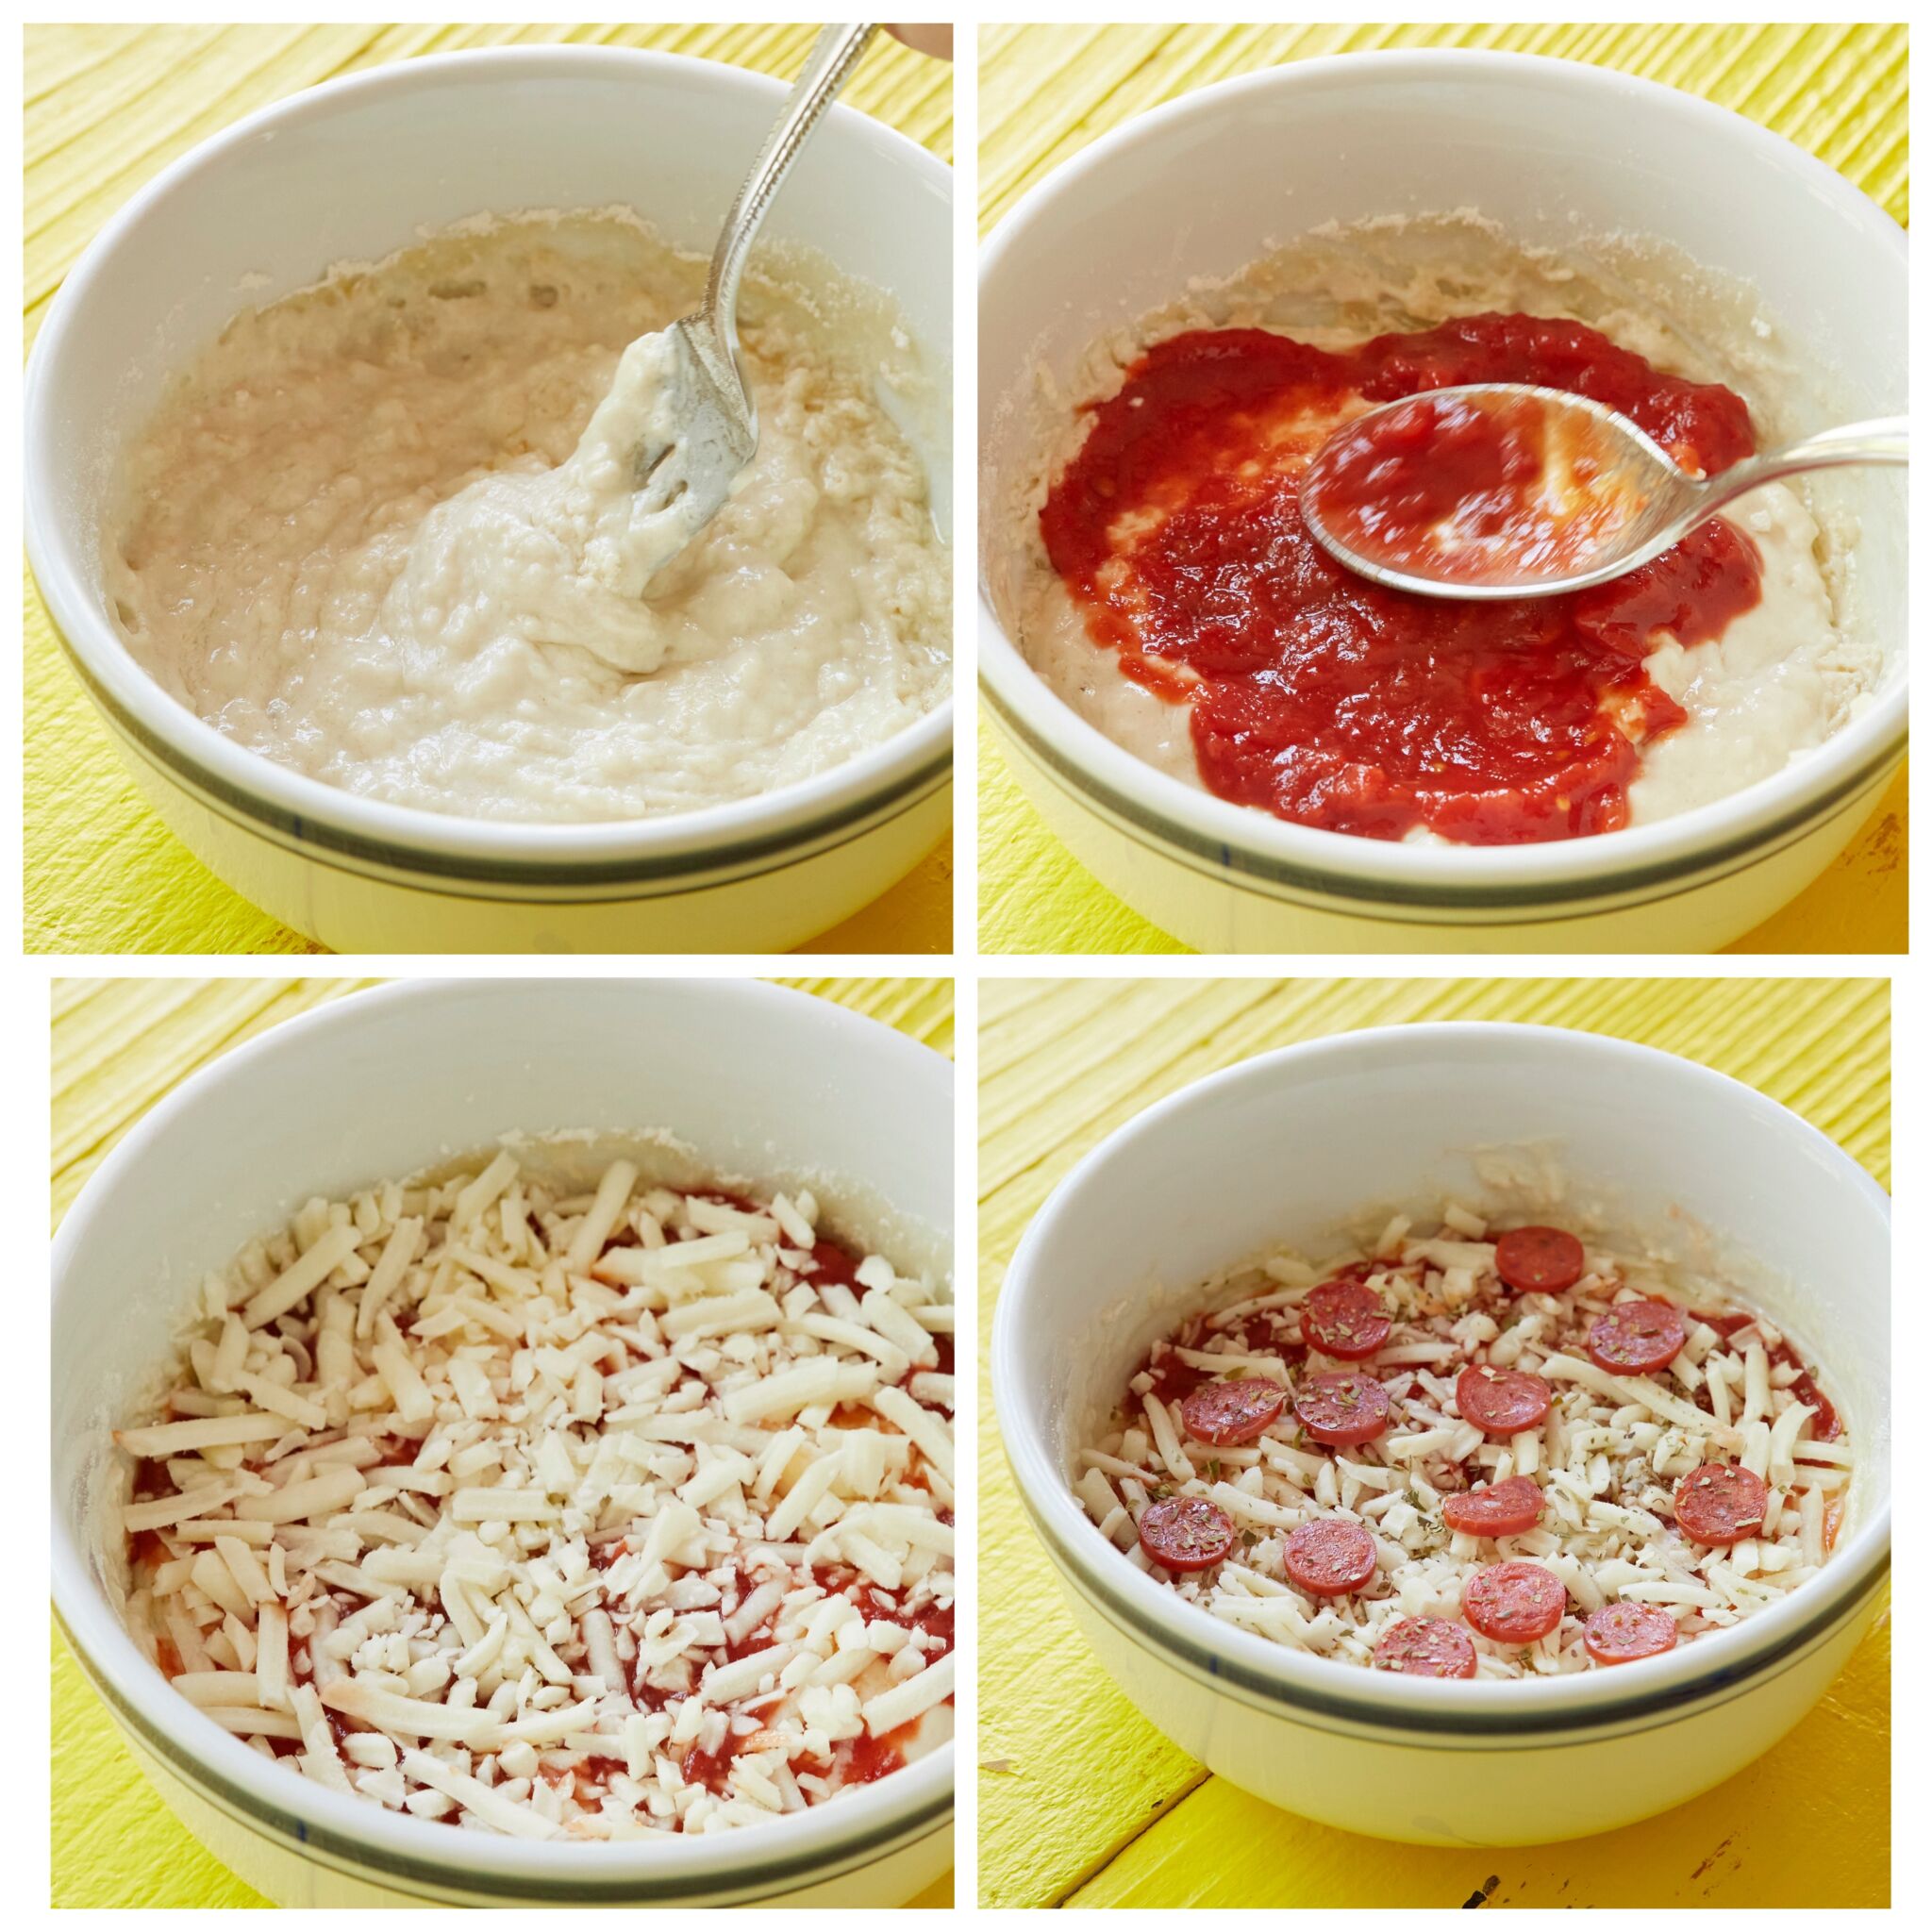 Step-by-step instruction on how to make a 2-Minute Microwave Pizza Bowl: After mixing dry ingredients first then adding in wet ingredients, you get a lumpy thick batter. Add the pizza sauce and spread it around the surface of the batter. Sprinkle on toppings including the cheese, pepperoni, and dried herbs. Ready to be cooked in the microwave. 